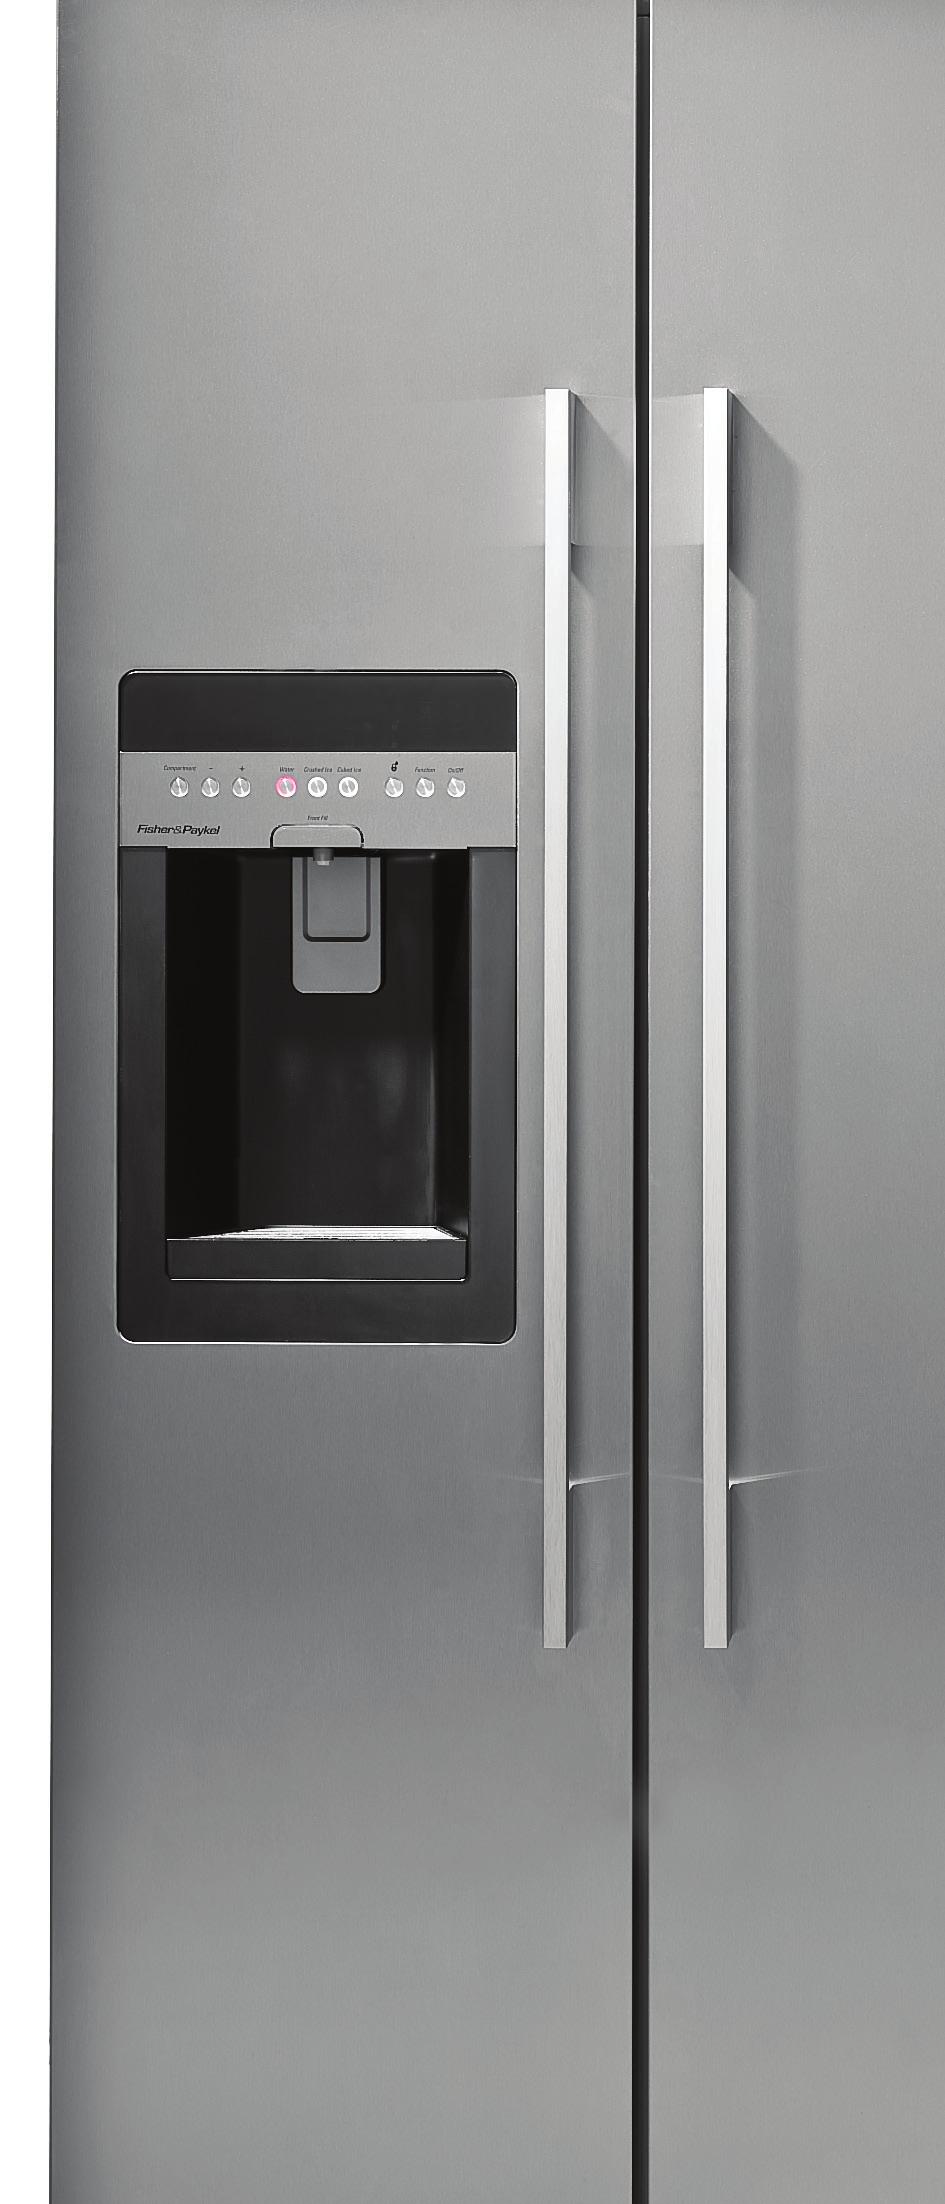 side by side refrigerator Key features The Fisher & Paykel side by side refrigerator offers a premium solution for your kitchen design.